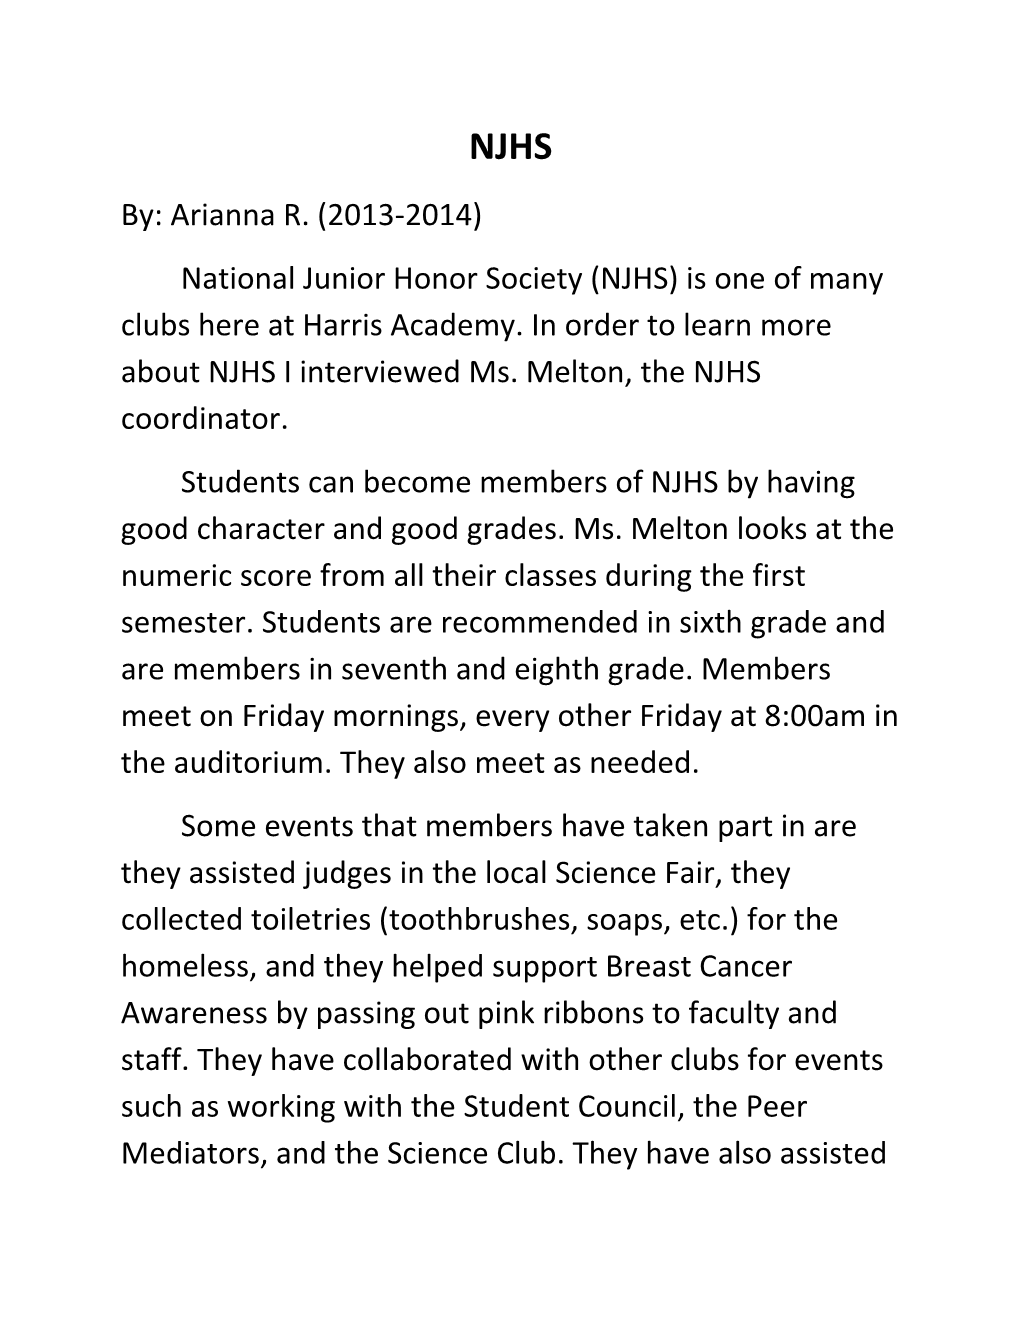 National Junior Honor Society (NJHS) Is One of Many Clubs Here at Harris Academy. in Order